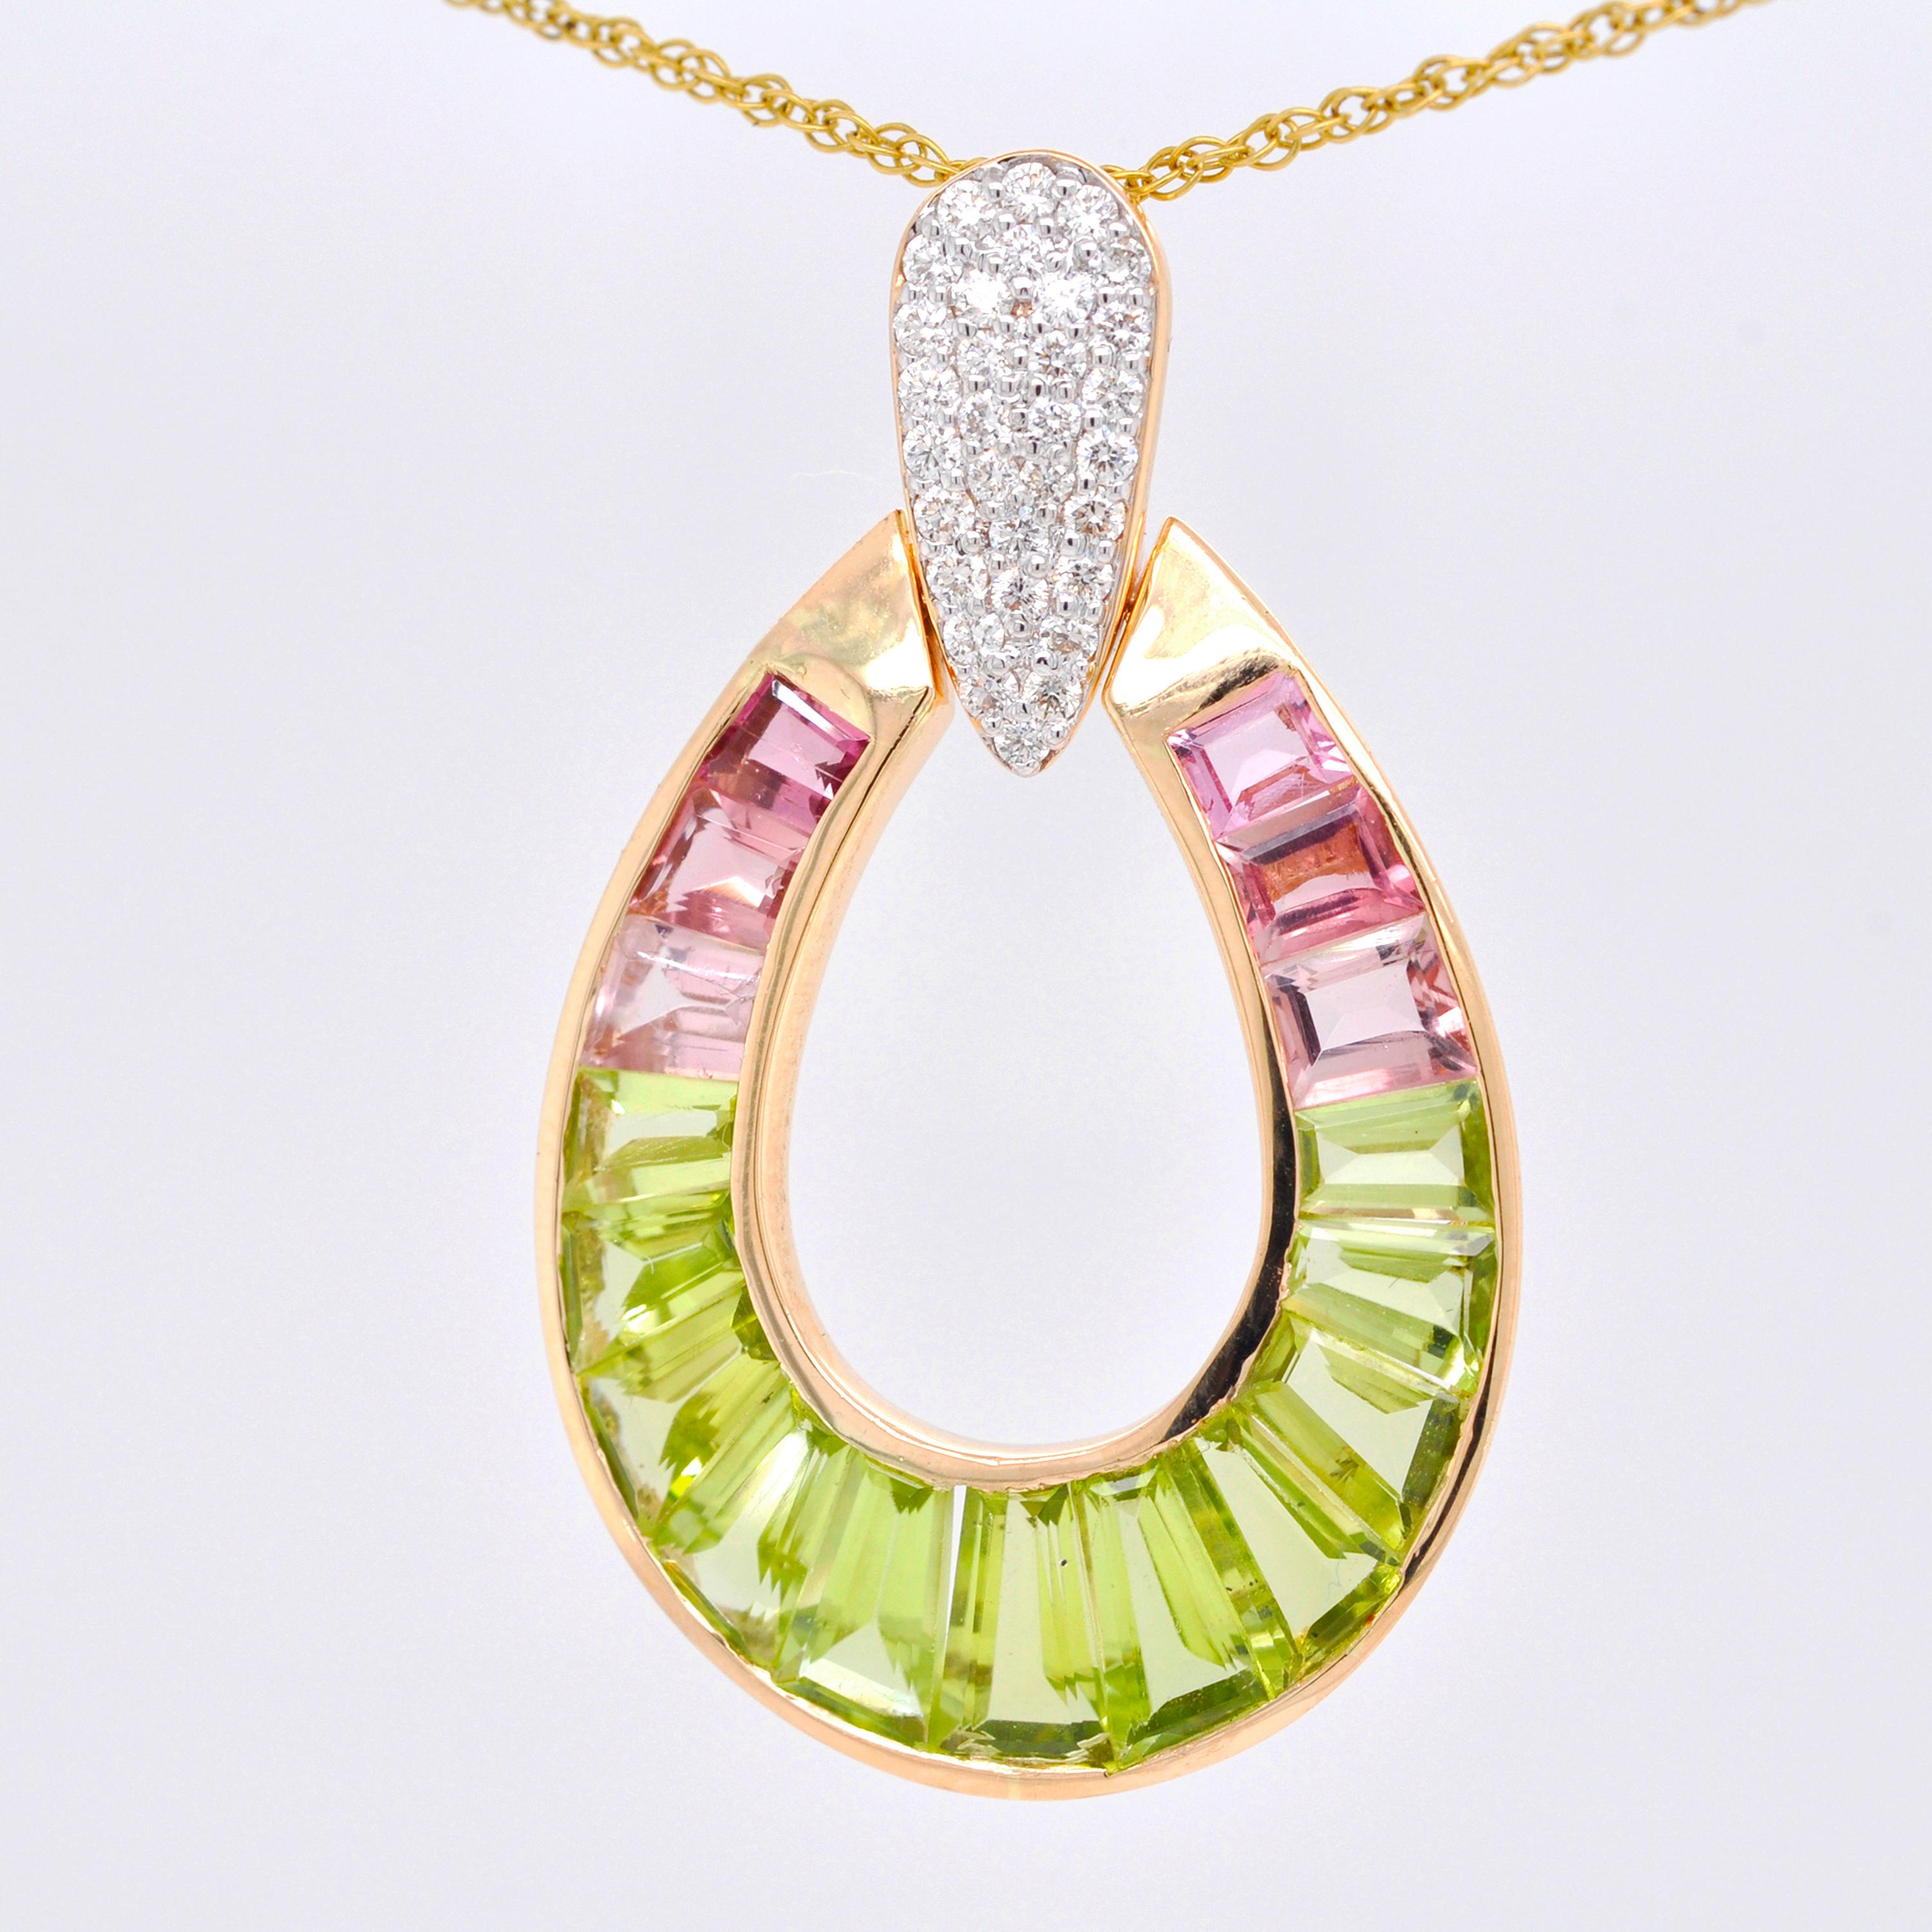 18K Gold Peridot Pink Tourmaline Raindrop Diamond Pendant Necklace Earrings Set In New Condition For Sale In Jaipur, Rajasthan